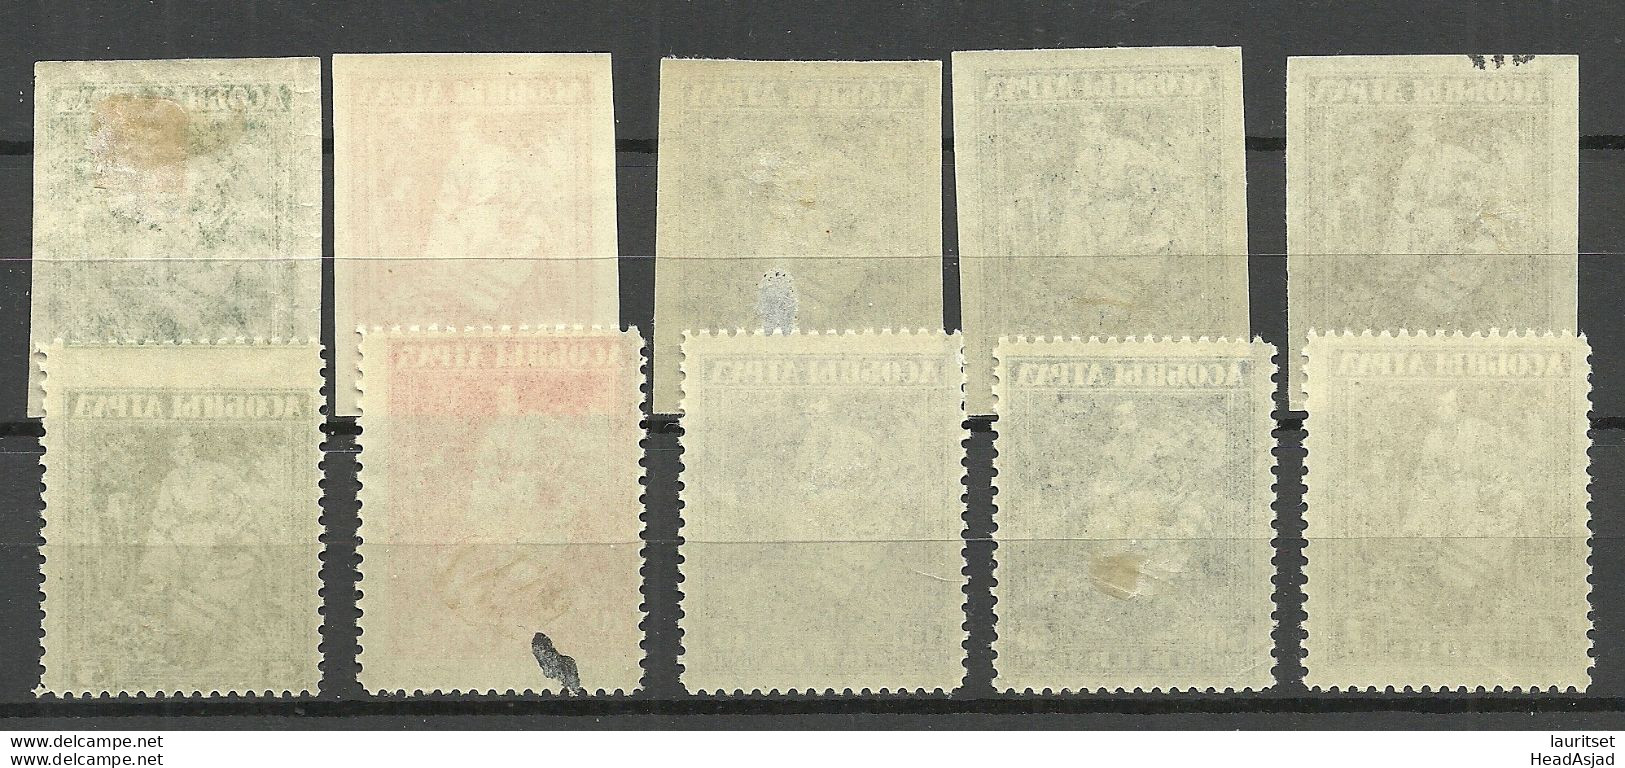 BELARUS 1919 General Bulak-Bulakhov Complete Sets Imperforated + Perforated MNH/MH NB! 1 Stamp Has Thinned Place! - Belarus